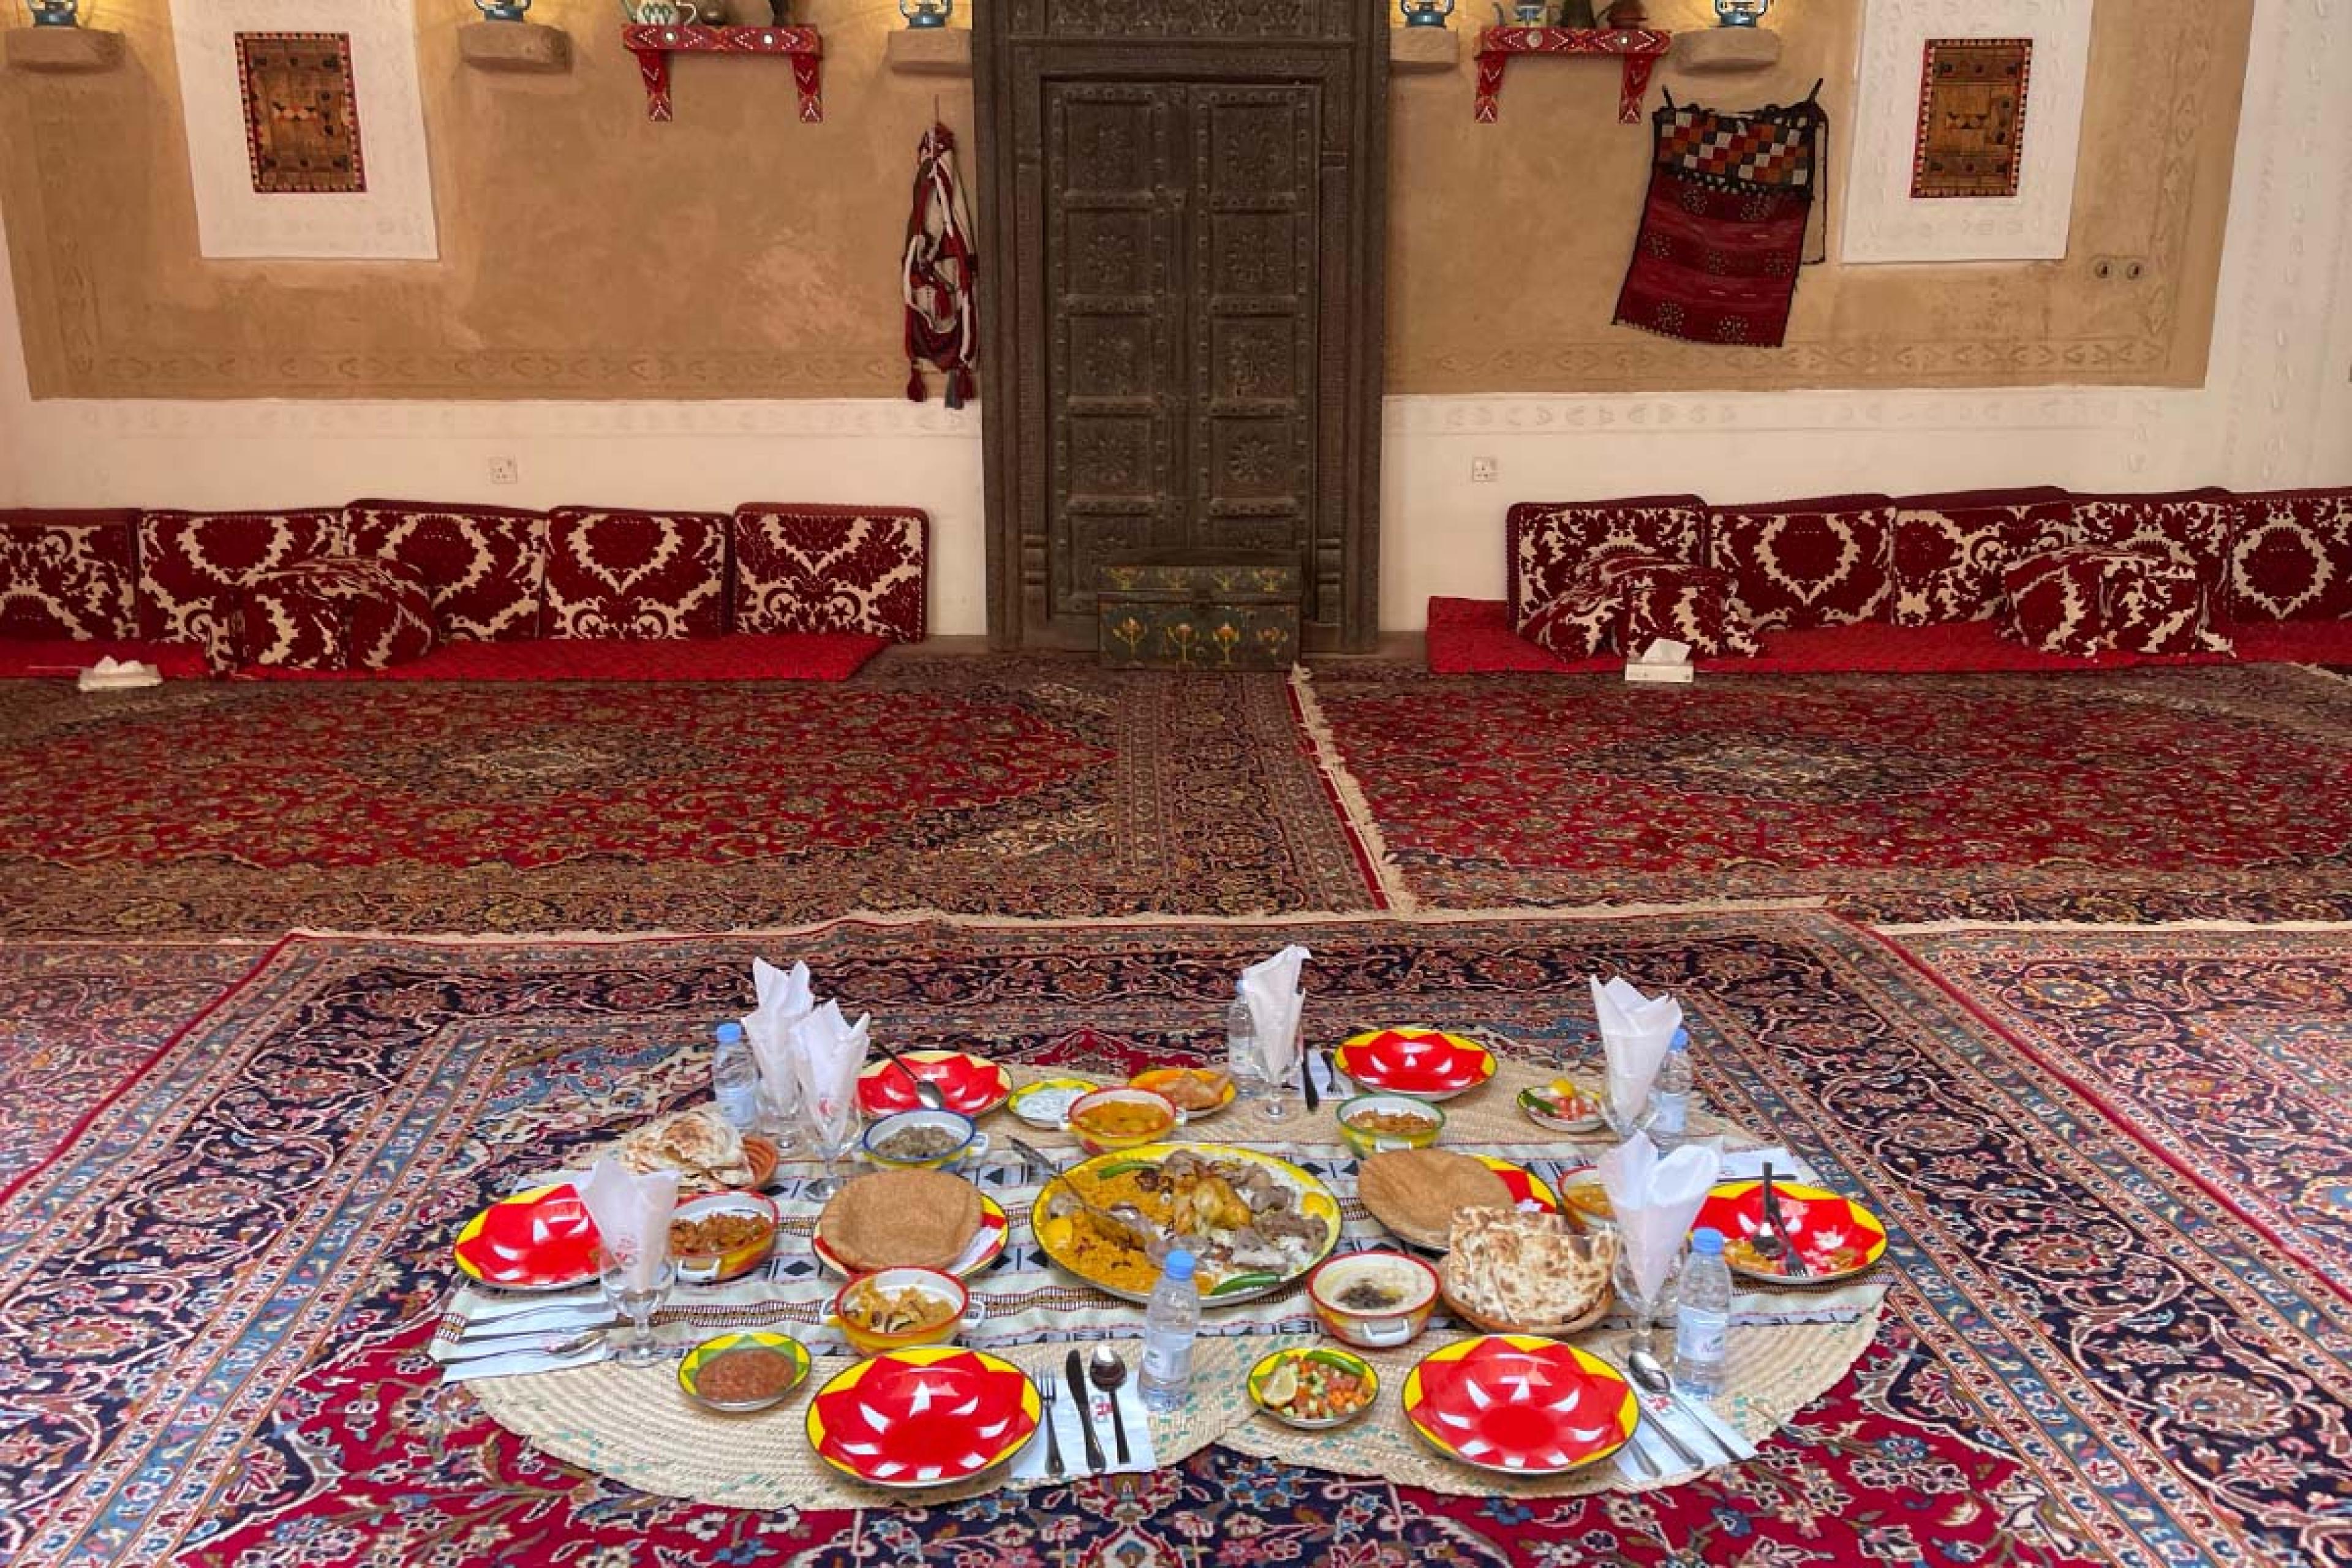 meal set out on a patterned rug